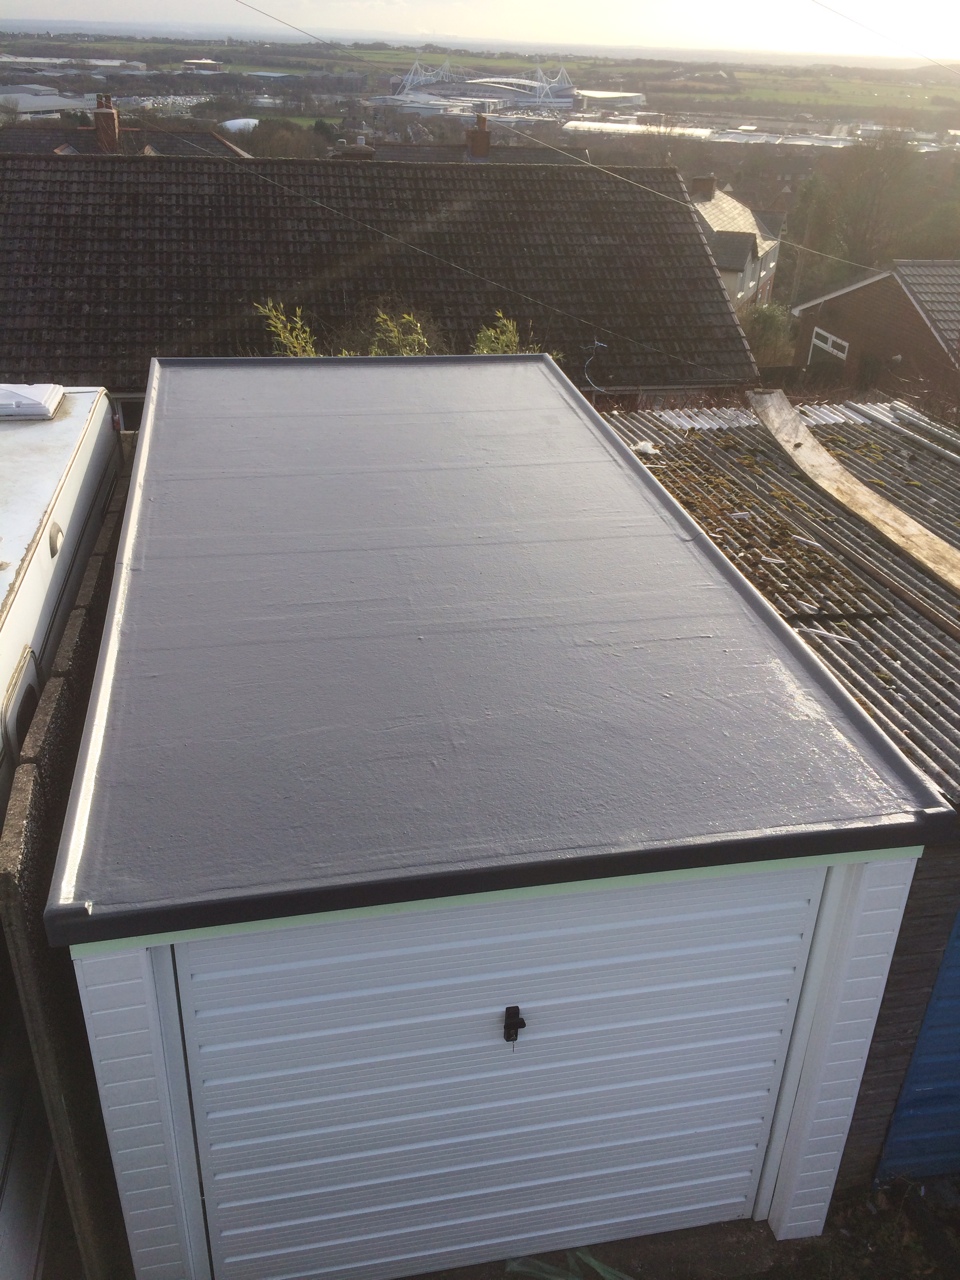 image shows grp roofing on a garage in sheffield